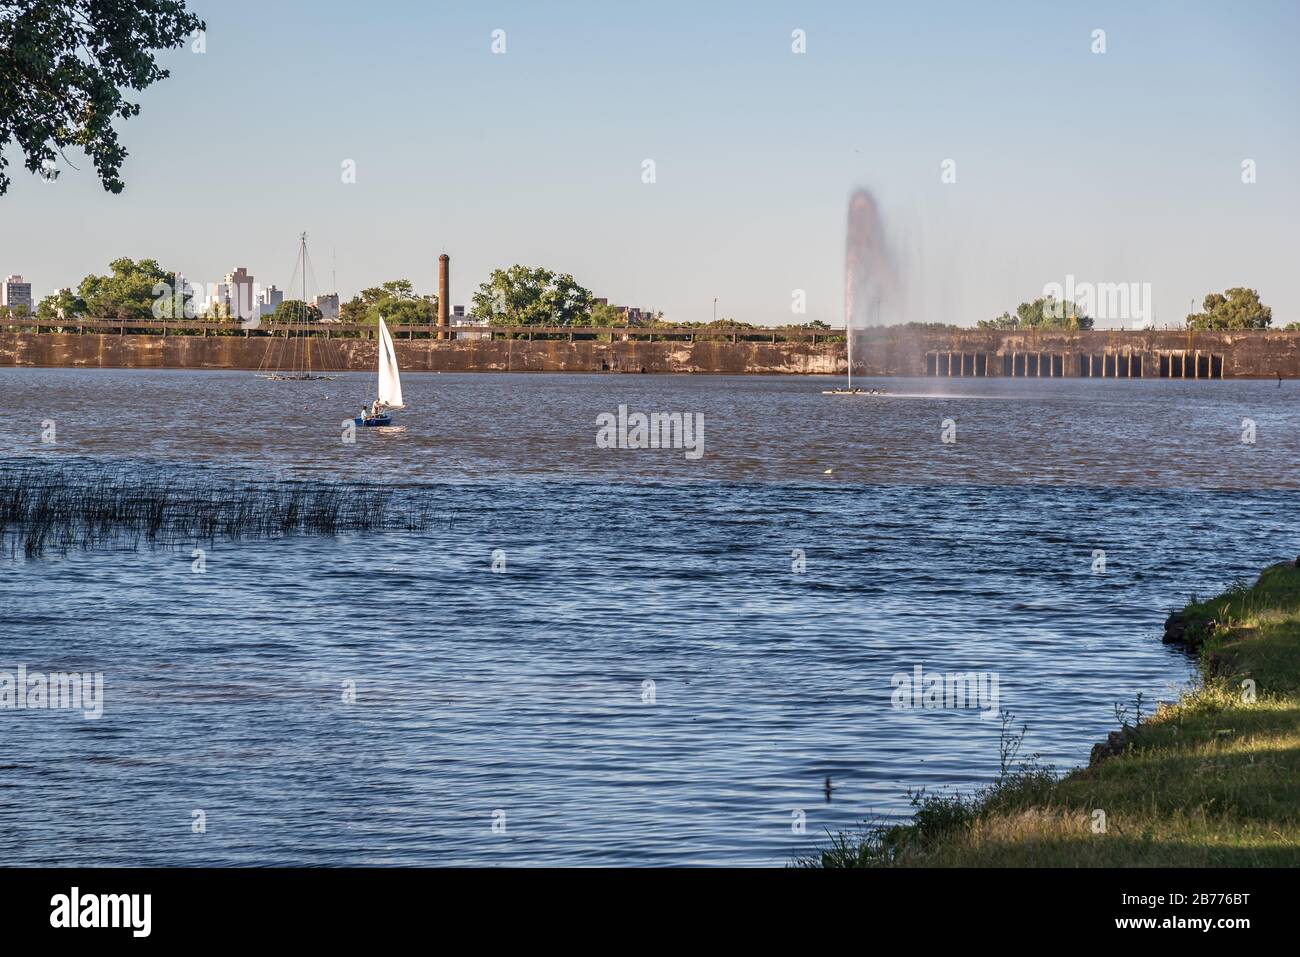 View of a blue lake with a city in the back a sailboat and a spring of water high up from the shore Stock Photo